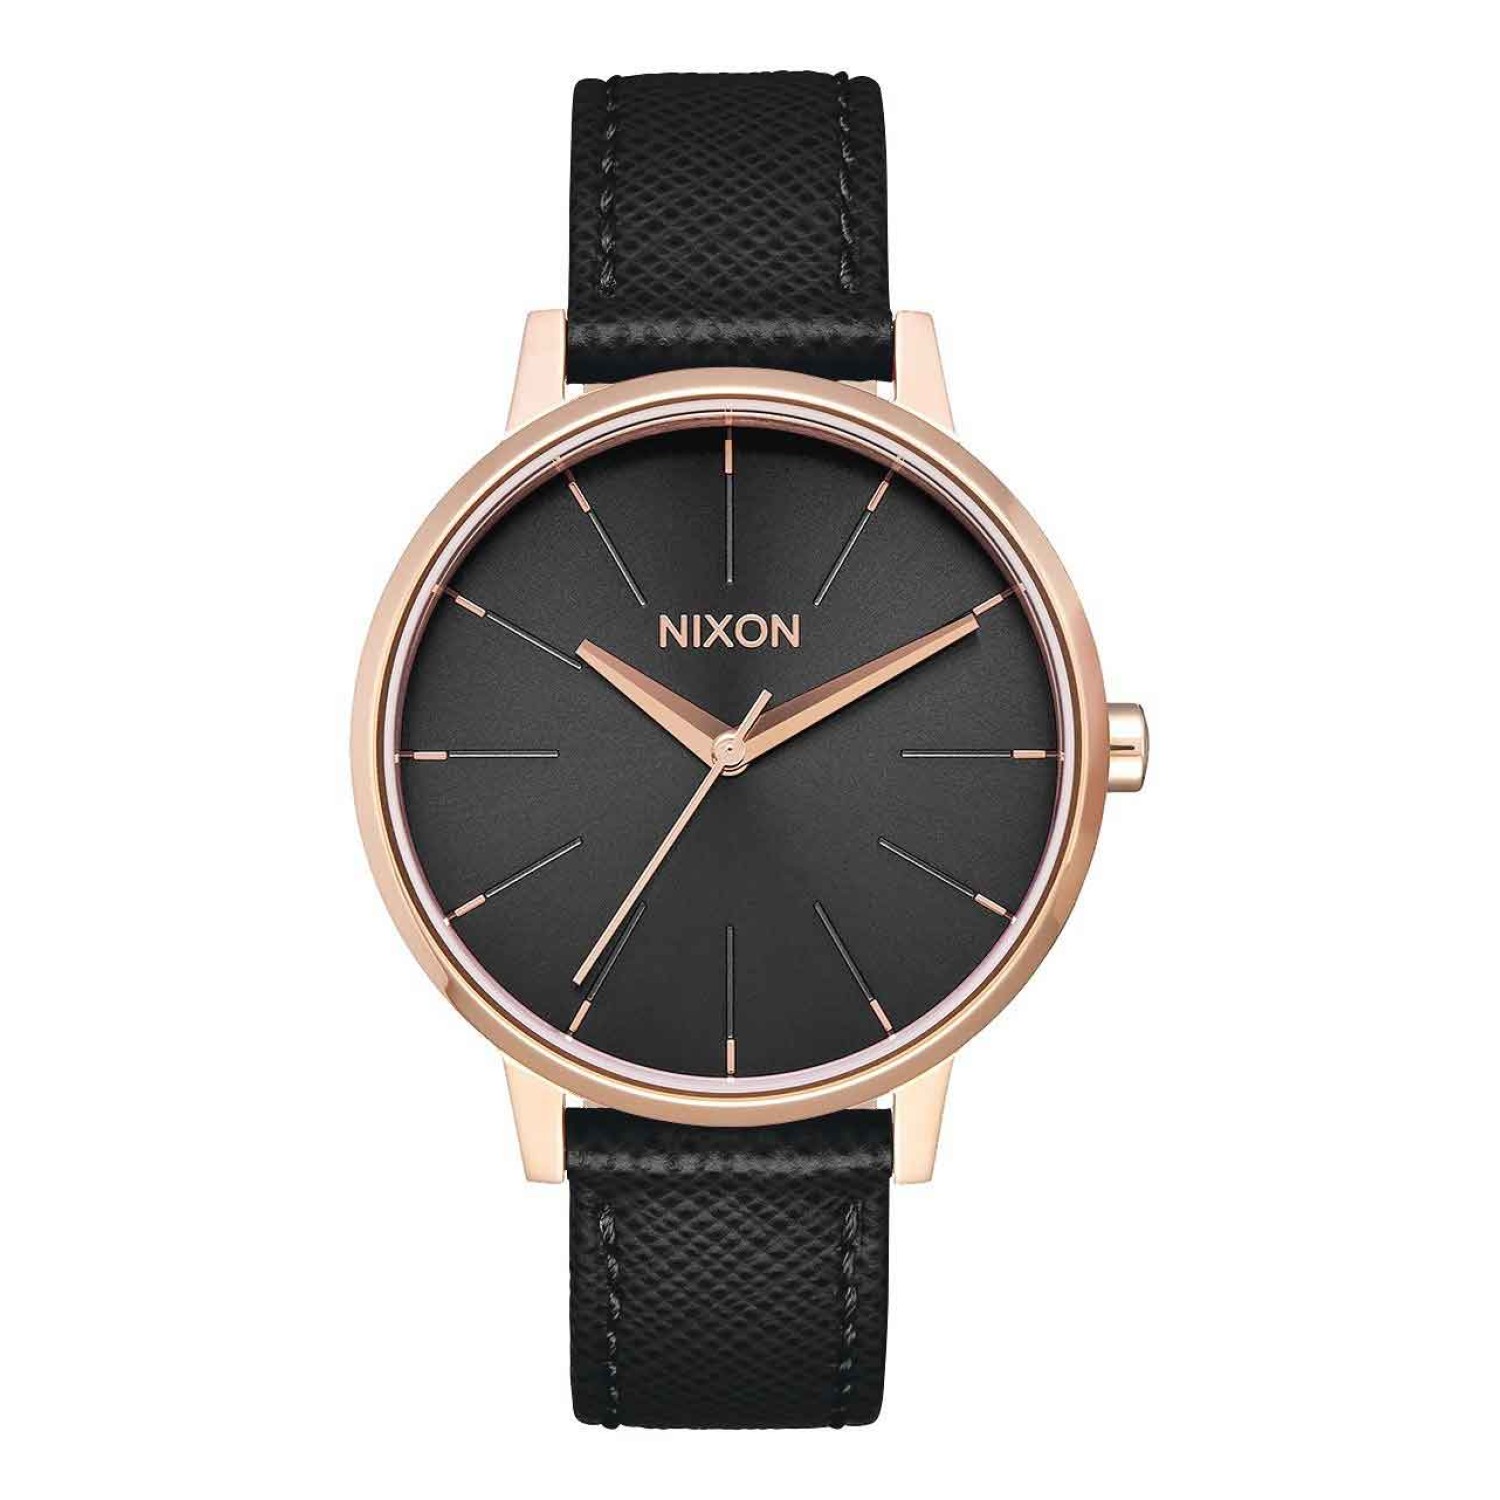 A108-1098-00 NIXON Womens Leather Kensington Watch. Clean and simple design language, an updated take on heirloom styles. Vintage inspired classic 37mm case size in a clean look that’s suitable for any setting - All Rose Gold with Black Dial and strap2 Ye